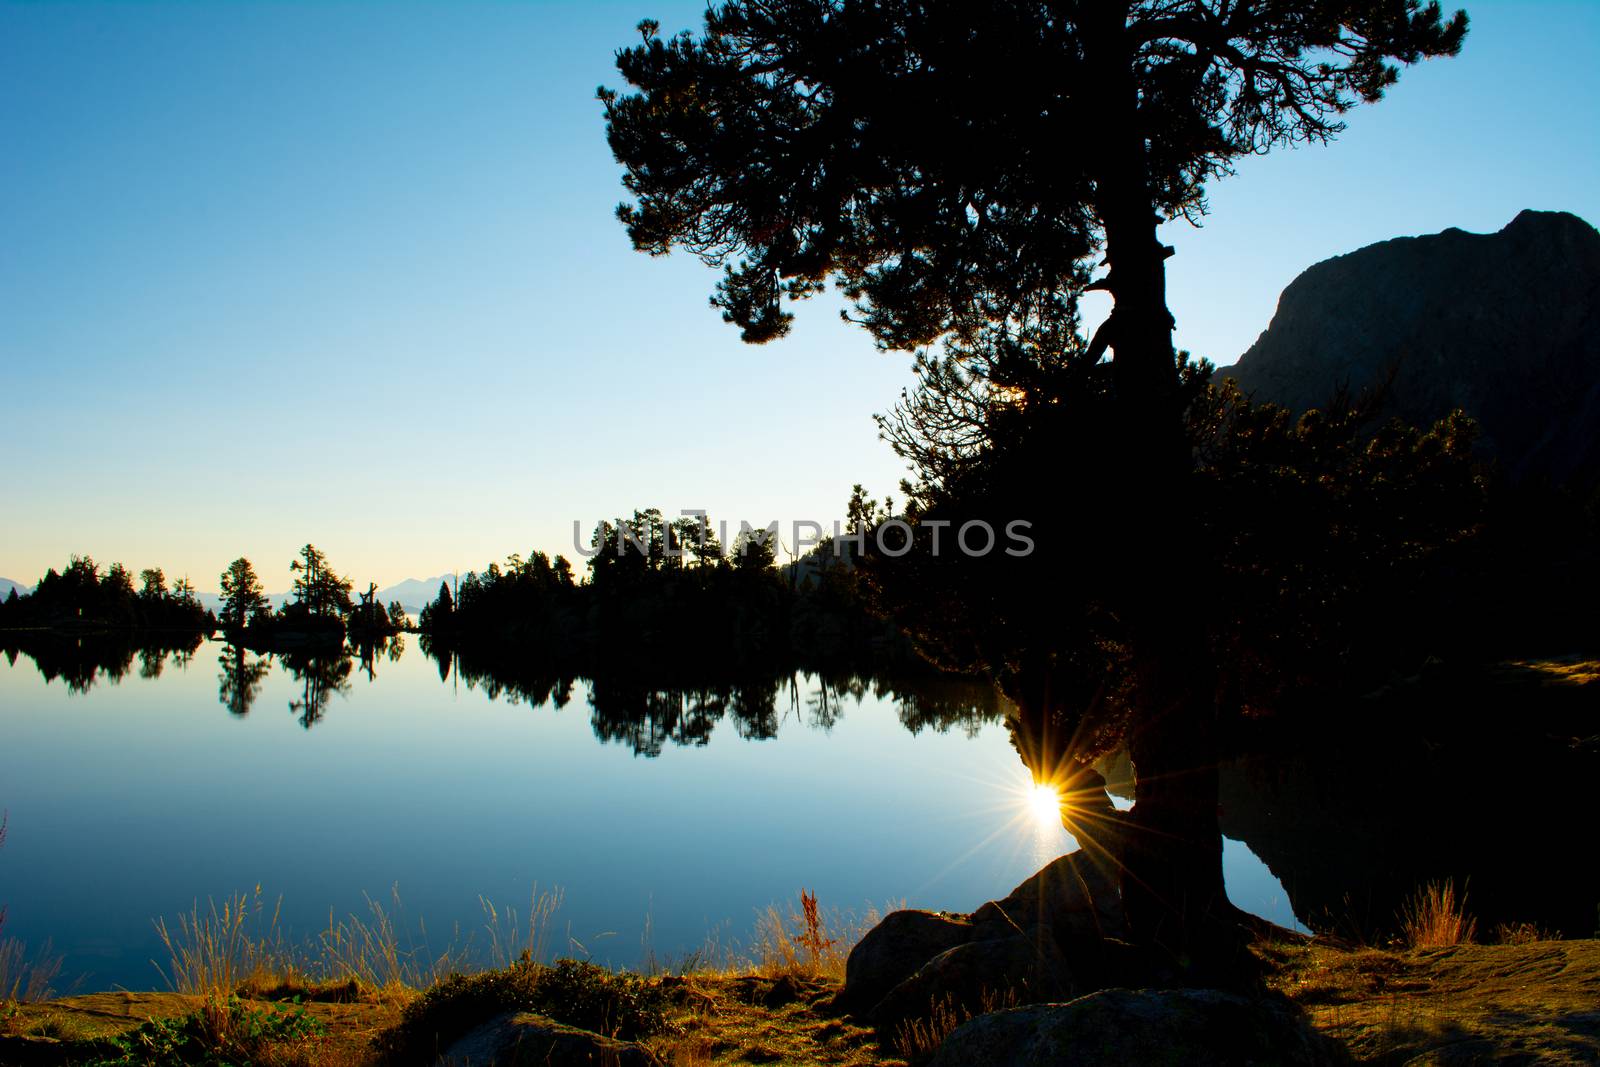 Sunset silhouette of trees and lake in natural enviornment, blue sky, reflections of surrounding landscape.